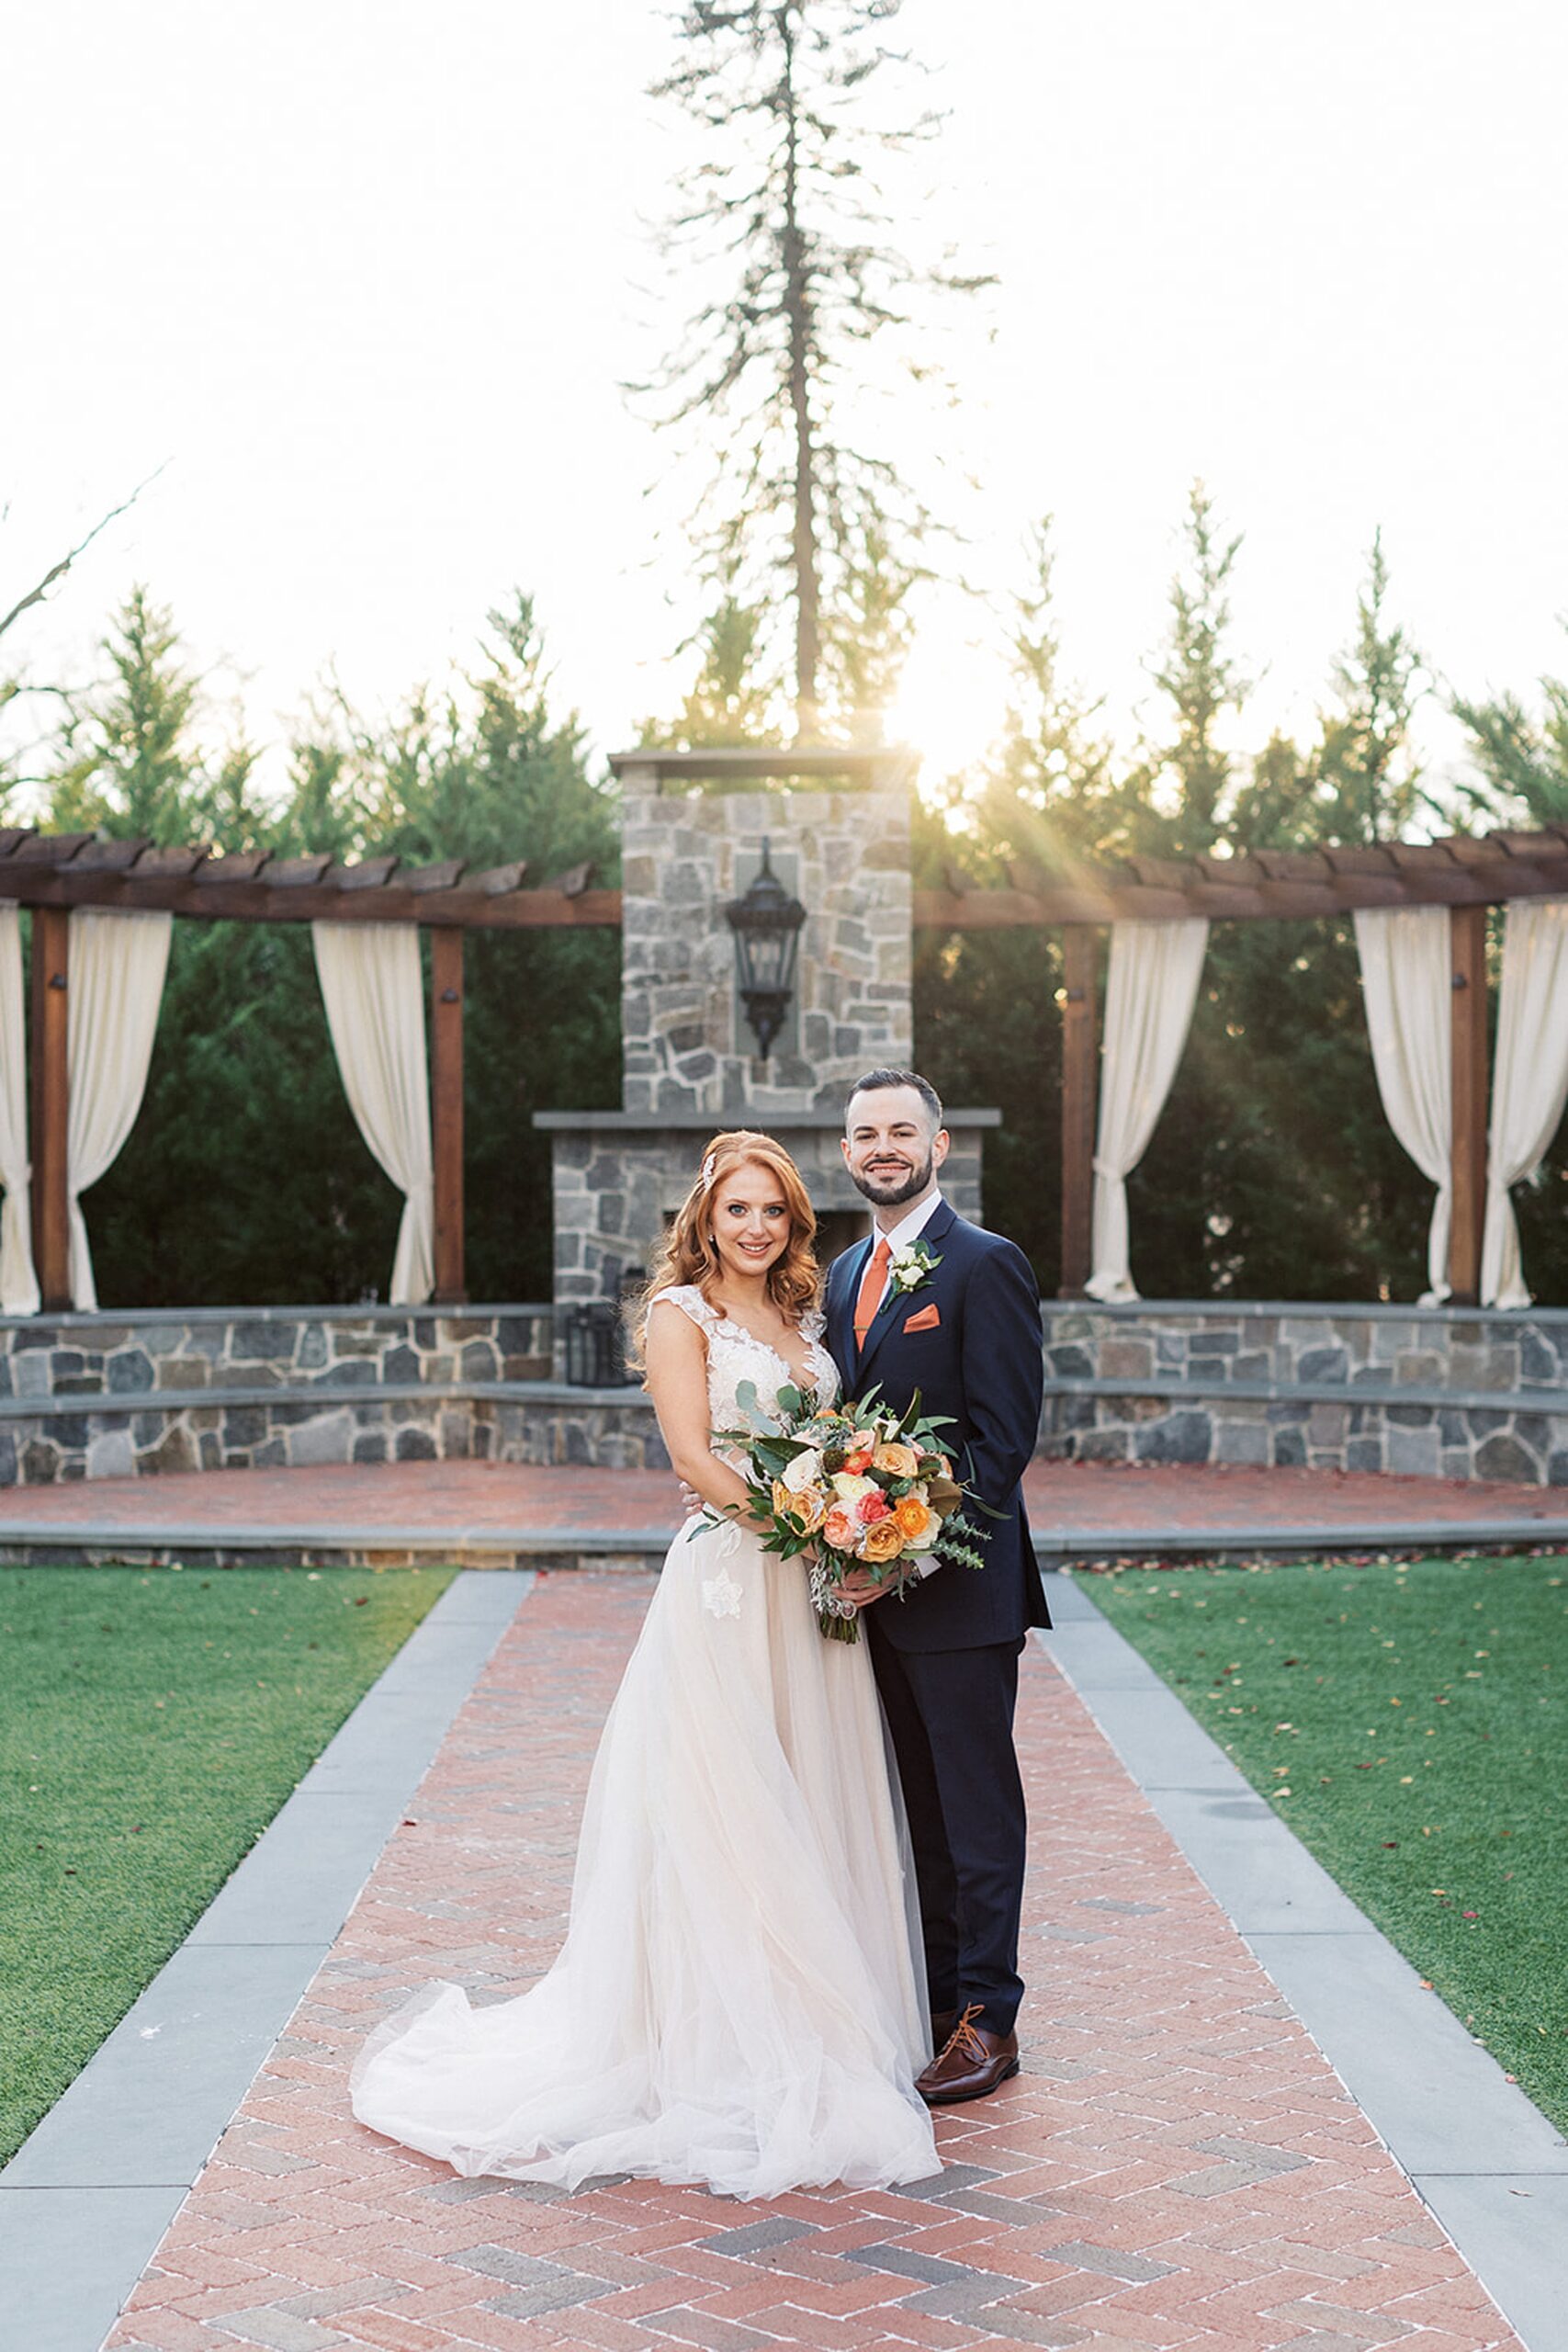 Newlyweds stand outside in a garden on a brick path at sunset holding the large orange bouquet at a David's country inn wedding